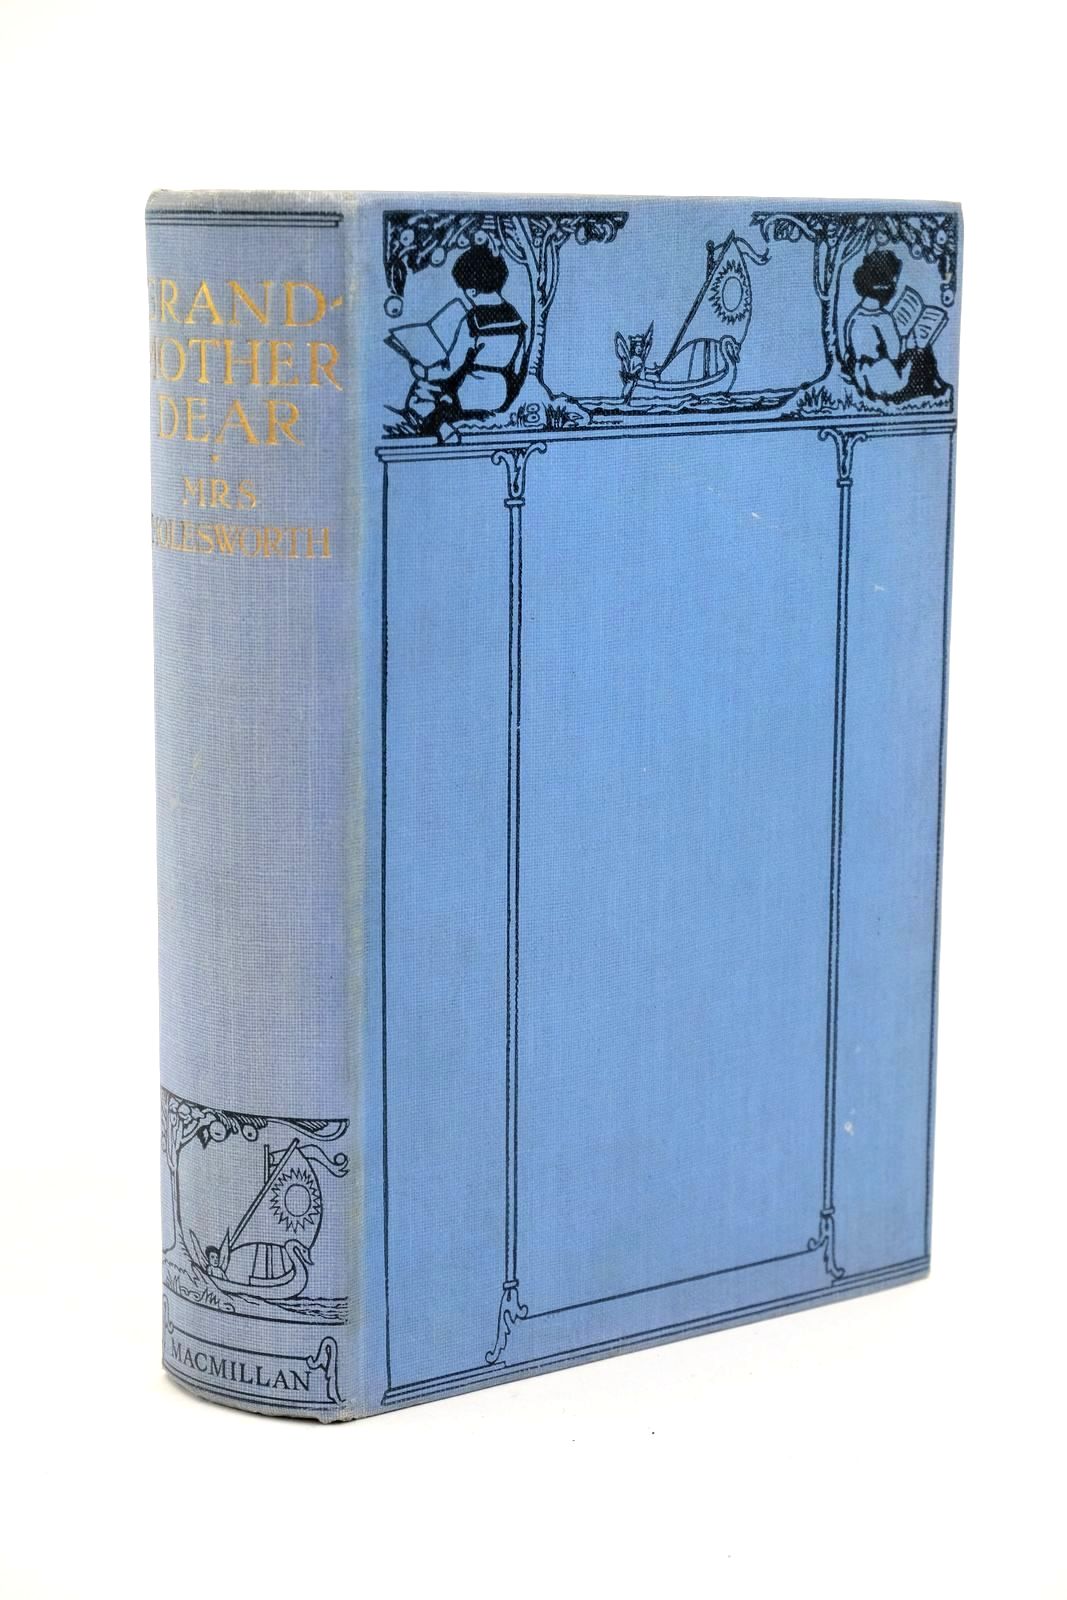 Photo of GRANDMOTHER DEAR written by Molesworth, Mrs. illustrated by Crane, Walter published by Macmillan &amp; Co. Ltd. (STOCK CODE: 1322997)  for sale by Stella & Rose's Books